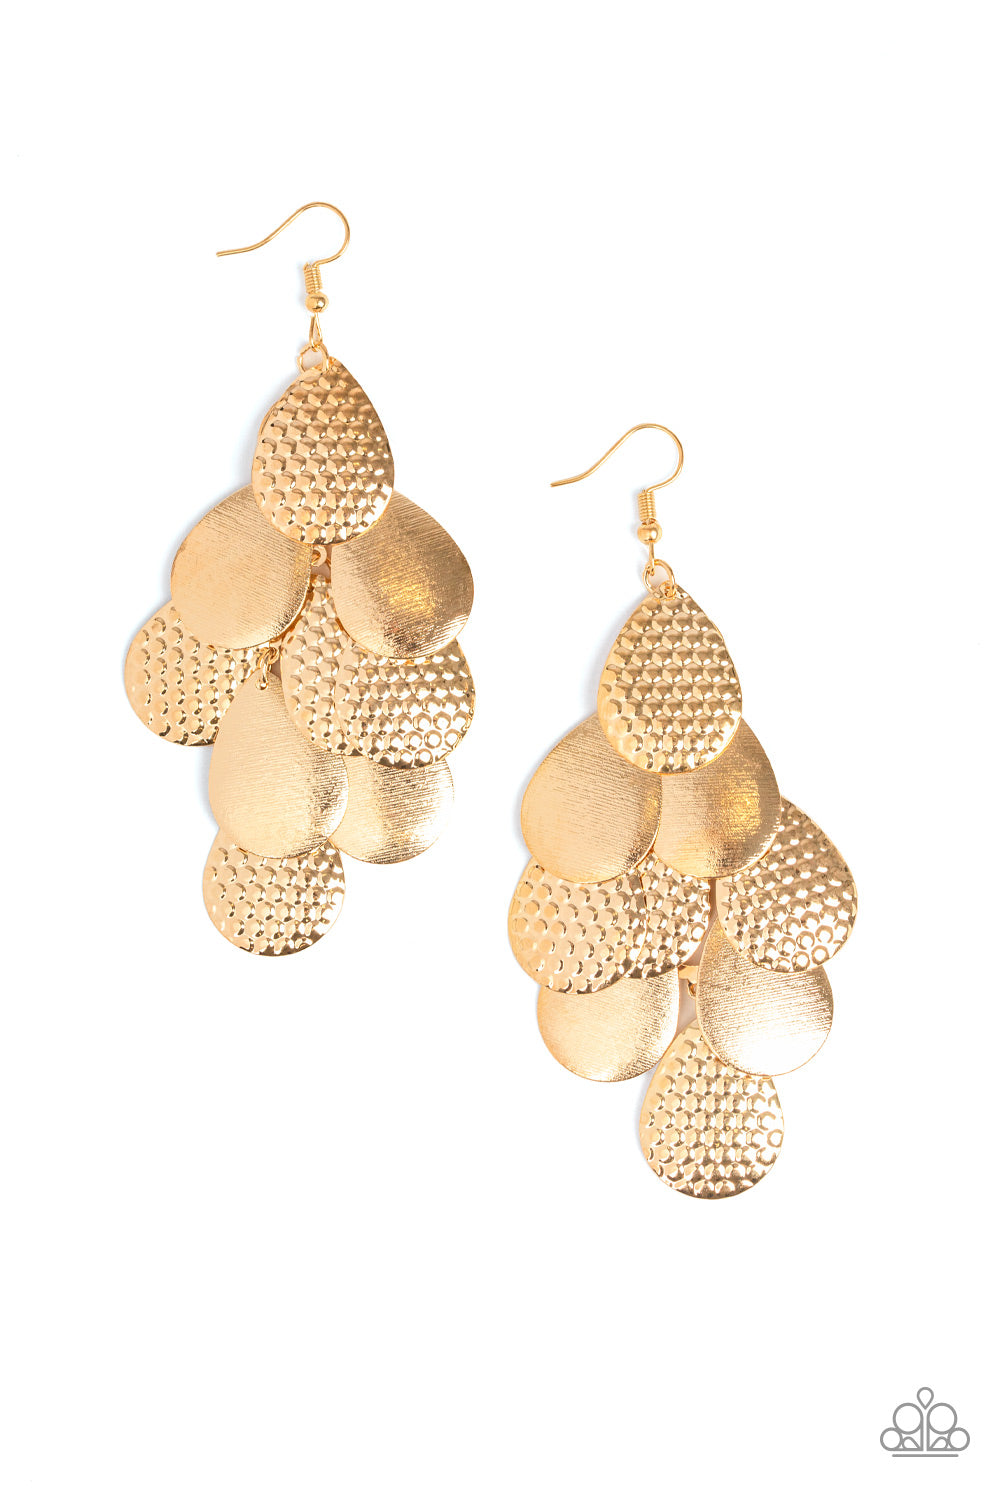 CHIME TIME - GOLD TEXTURED TEARDROPS CHIME WATERFALL CASCADE EARRINGS